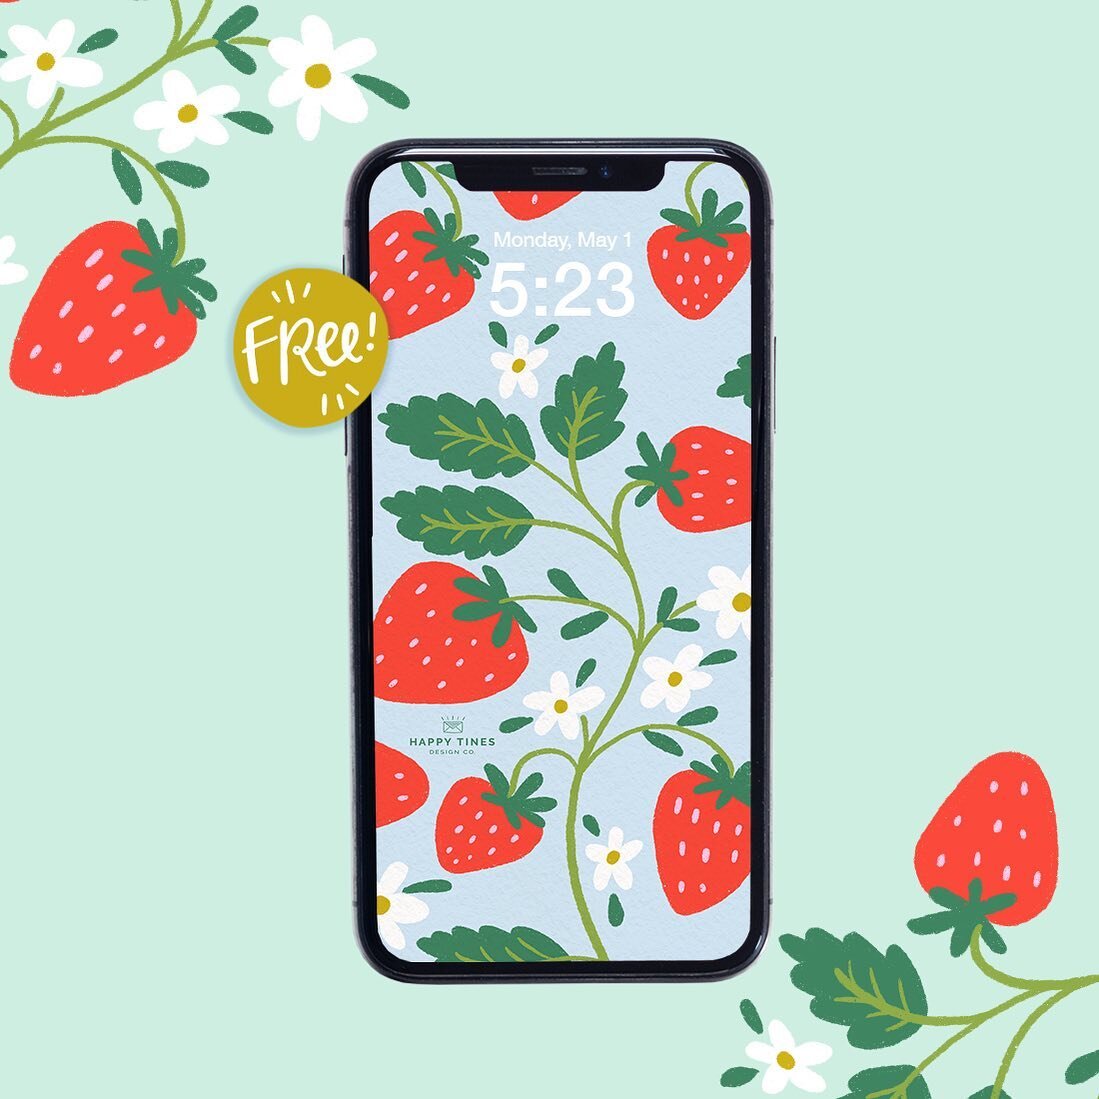 It&rsquo;s a beautiful day for a new phone wallpaper! 😍 Happy May, friends! The strawberries just seemed oh so fitting for this fun month. Email subscribers got their freebie this morning! If you&rsquo;re using this wallpaper, comment below with a ?